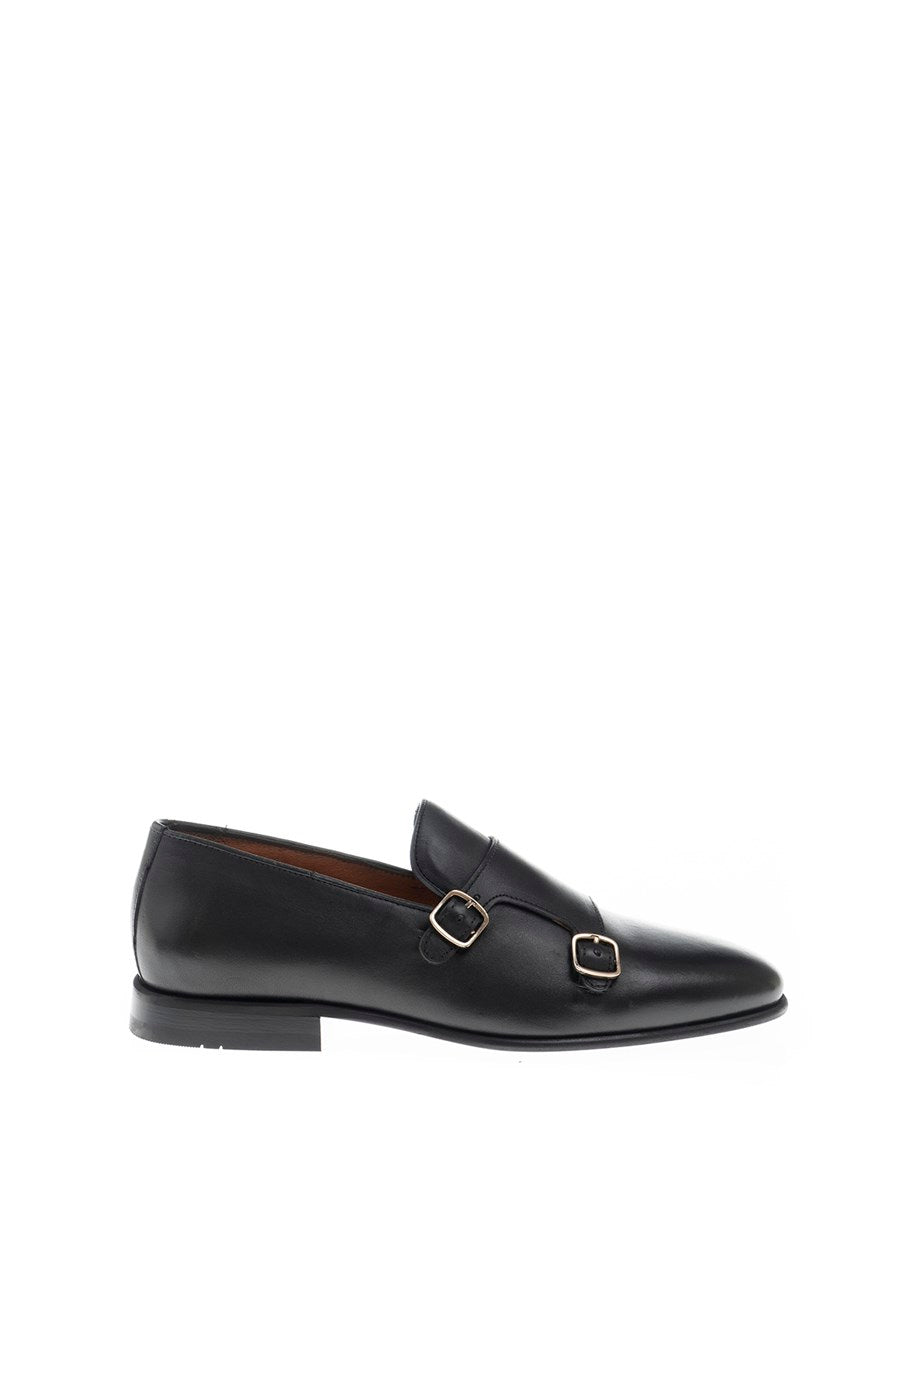 Genuine Leather Double Buckle Loafer - MENSTYLEWITH